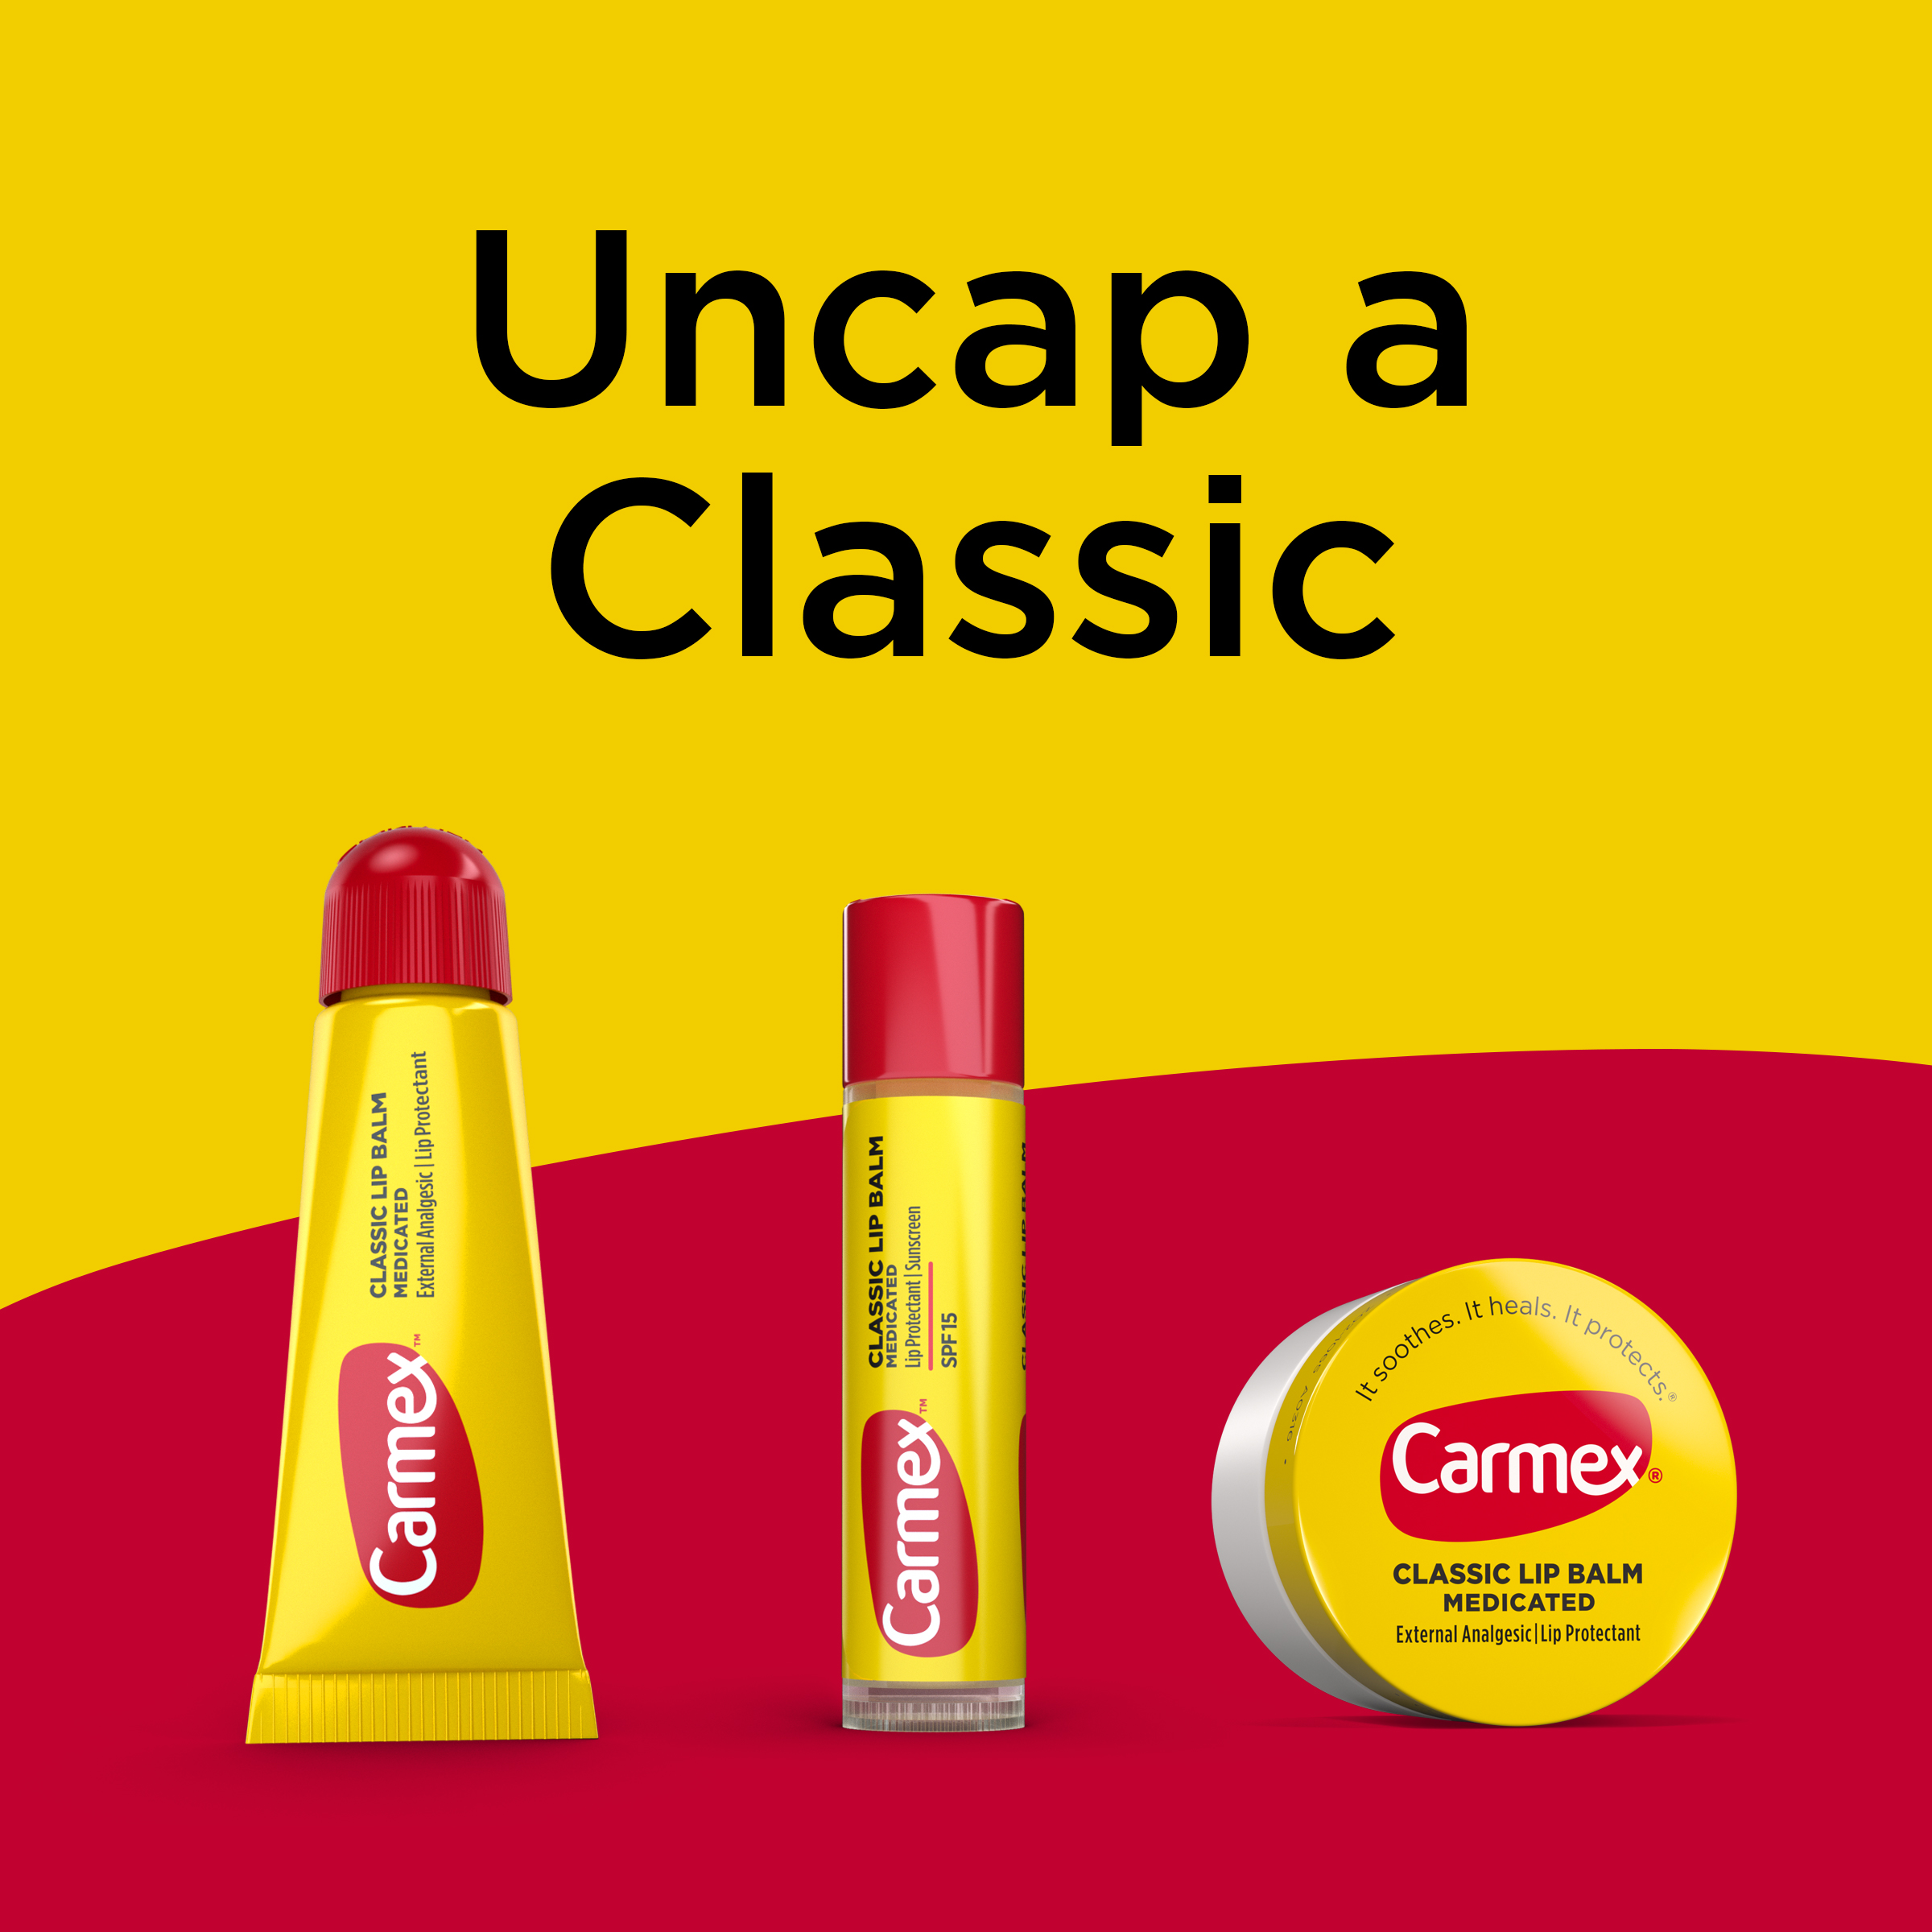 Carmex Moisturizing Medicated Lip Balm with Cocoa Butter, Camphor & Menthol, Multi-Flavor, 24 Pack - image 9 of 11